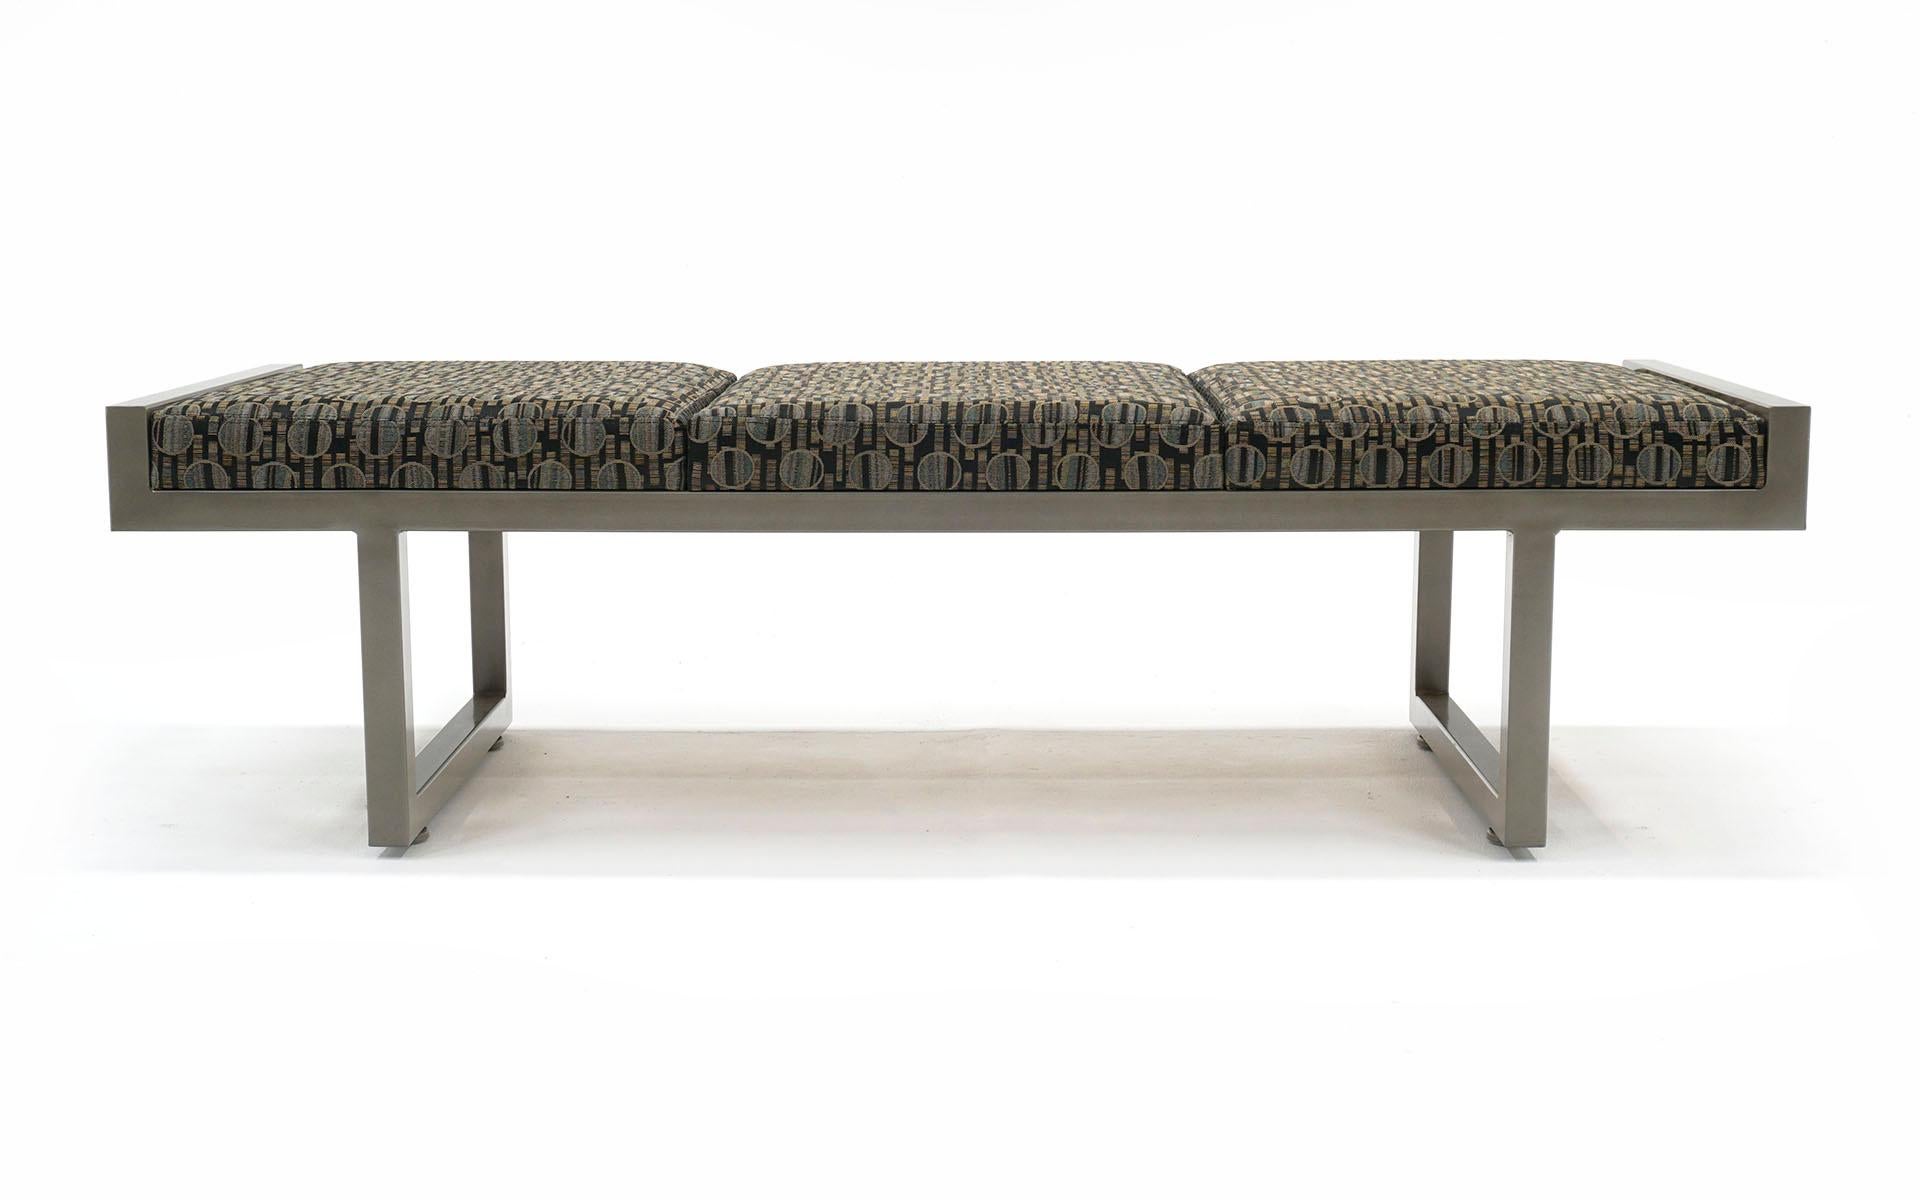 Modern Upholstered Bench in Like New Condition. Heavy Steel Frame in Gray / Taupe